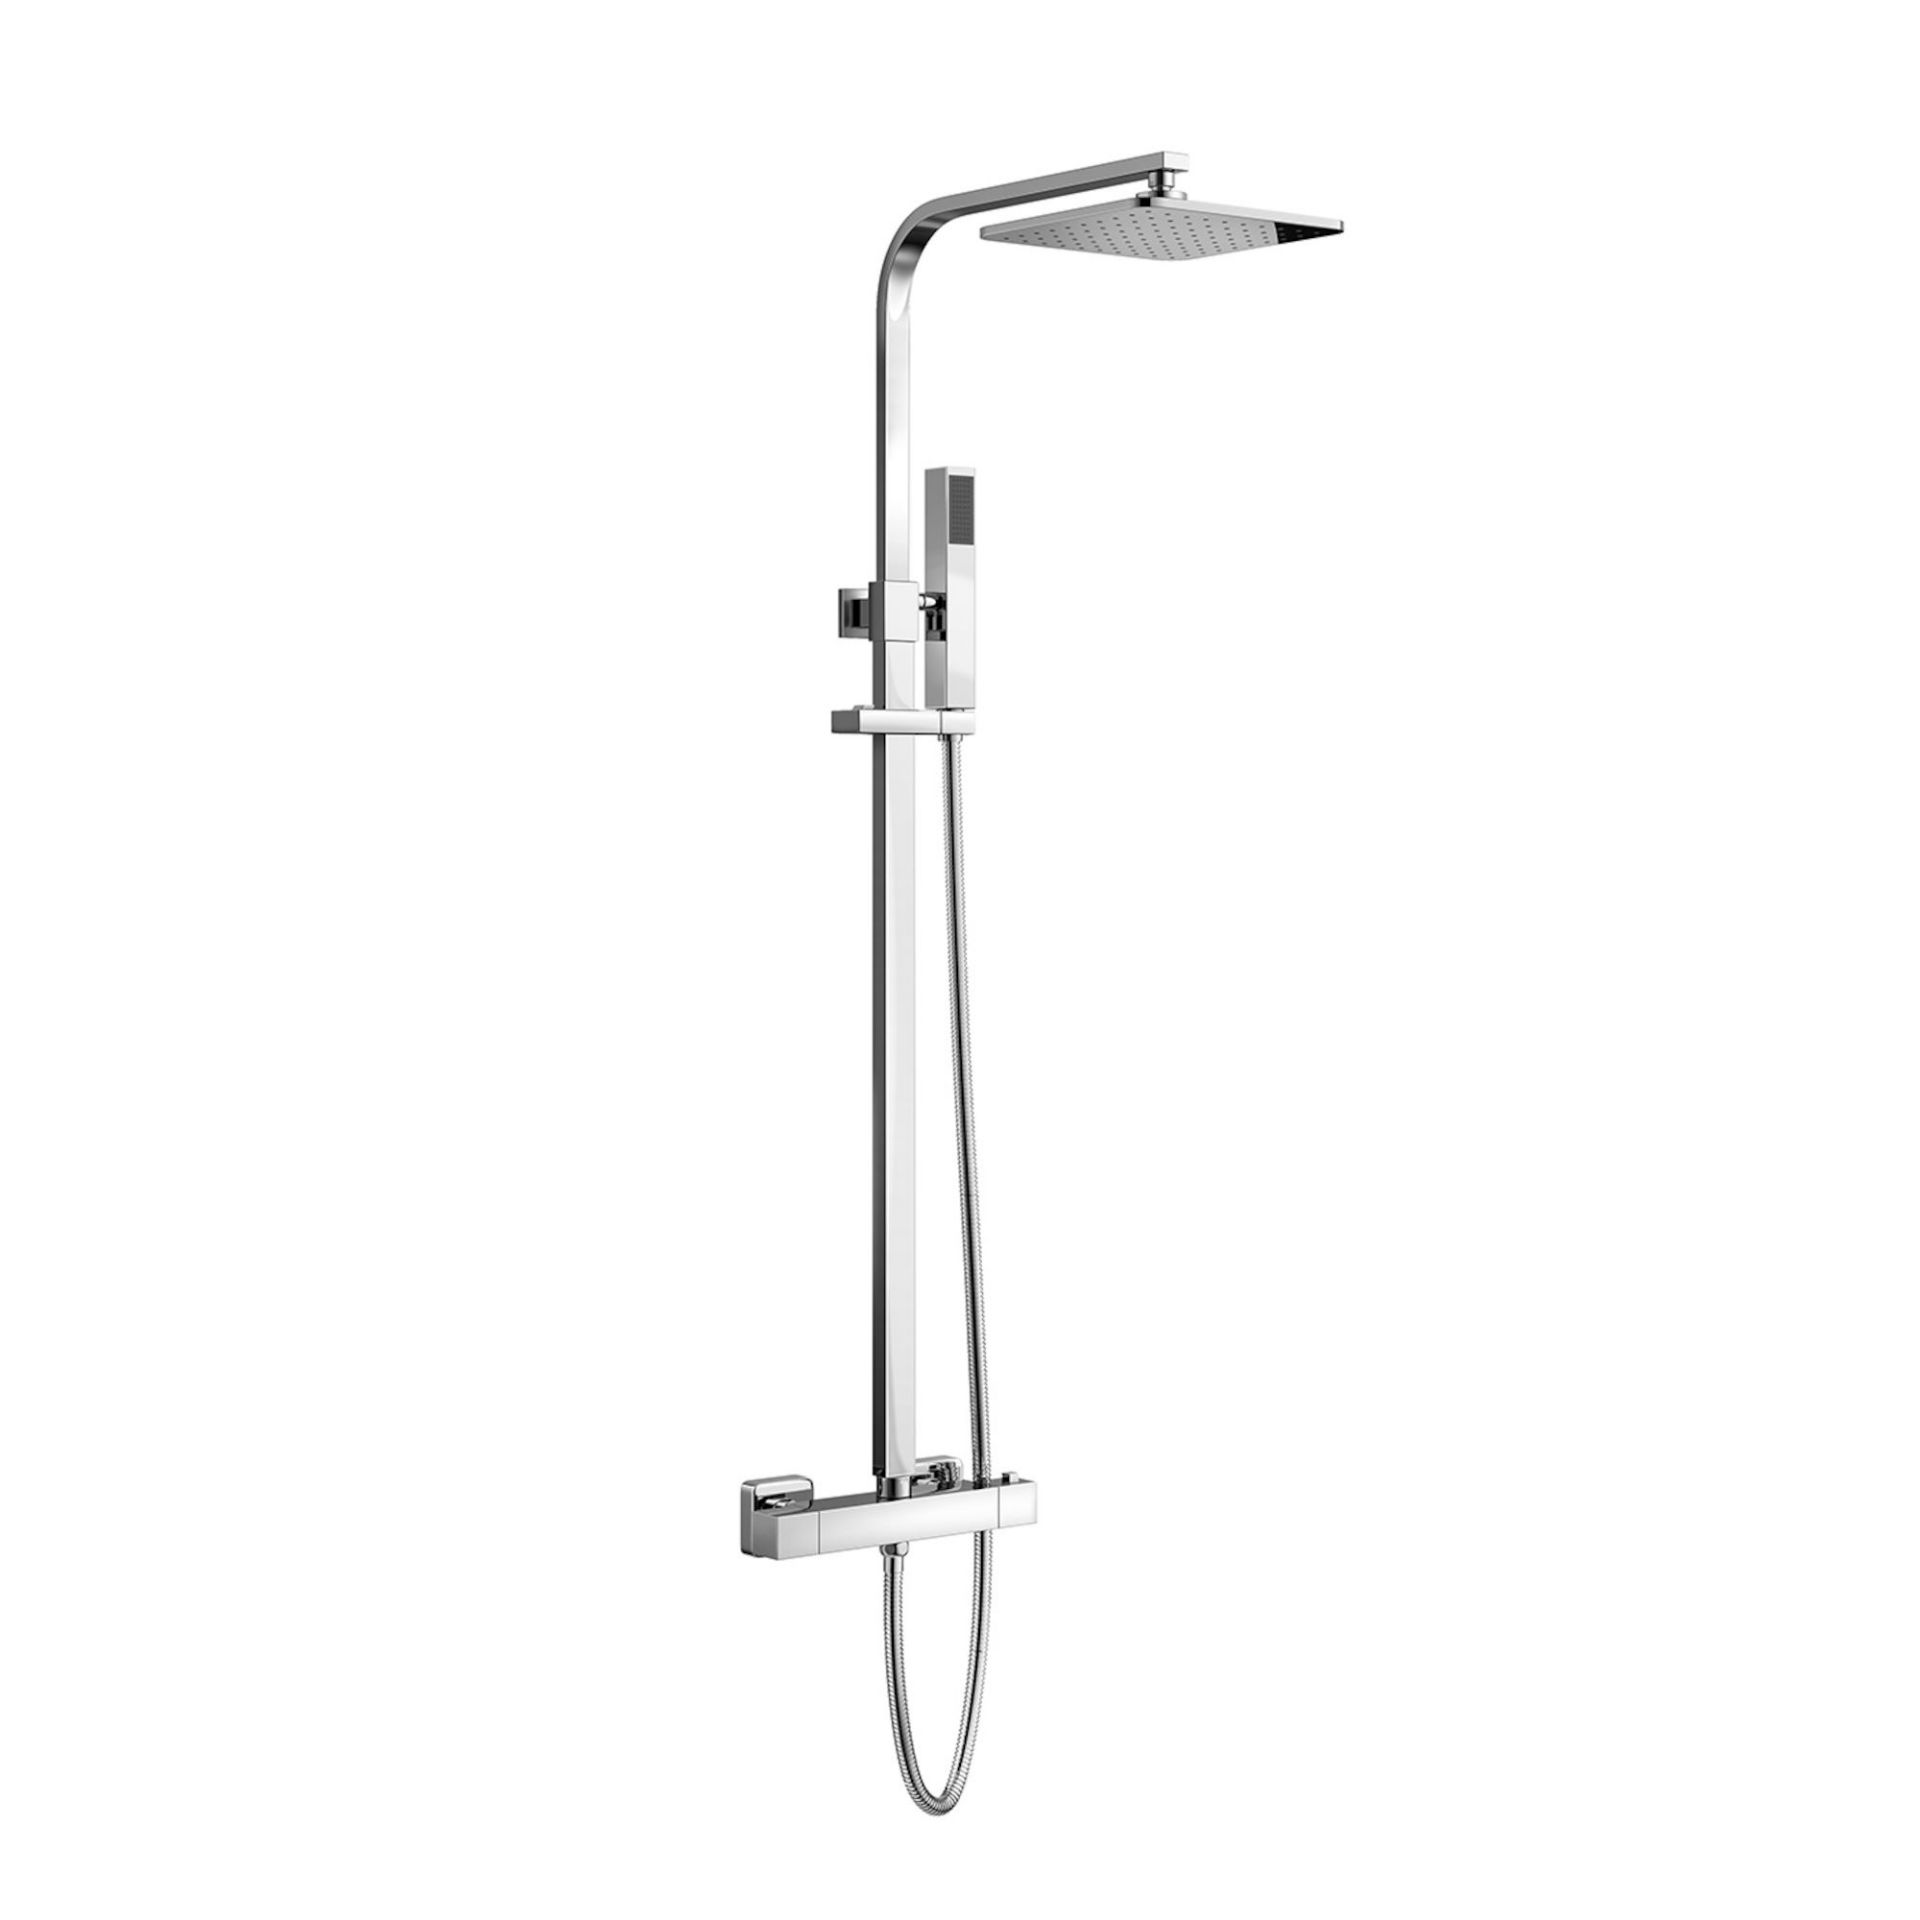 (YC222) Square Exposed Thermostatic Shower Kit & Medium Head- Harper. Angled slim and on-trend - Image 2 of 3